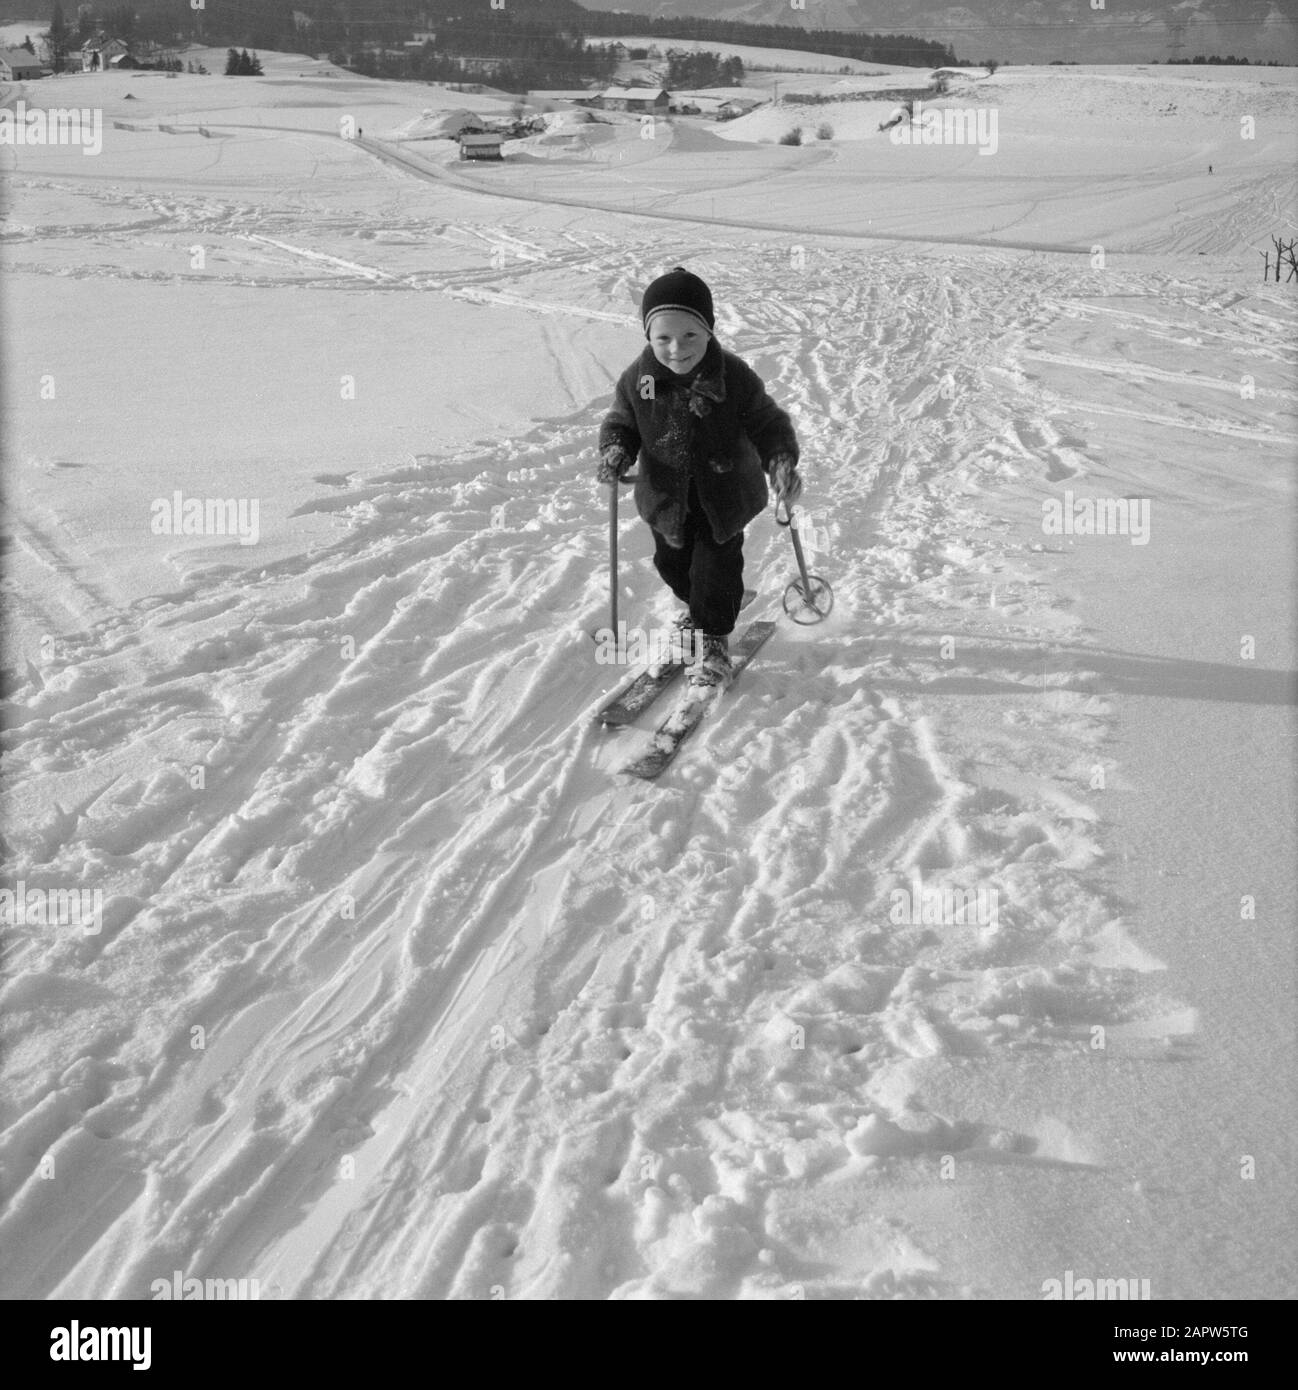 Winter in Tyrol  Child with skis in the snow Date: January 1960 Location: Austria, Sistrans, Tyrol Keywords: mountains, landscapes, cross-country skiing, skiing, snow, winter, winter sports Stock Photo